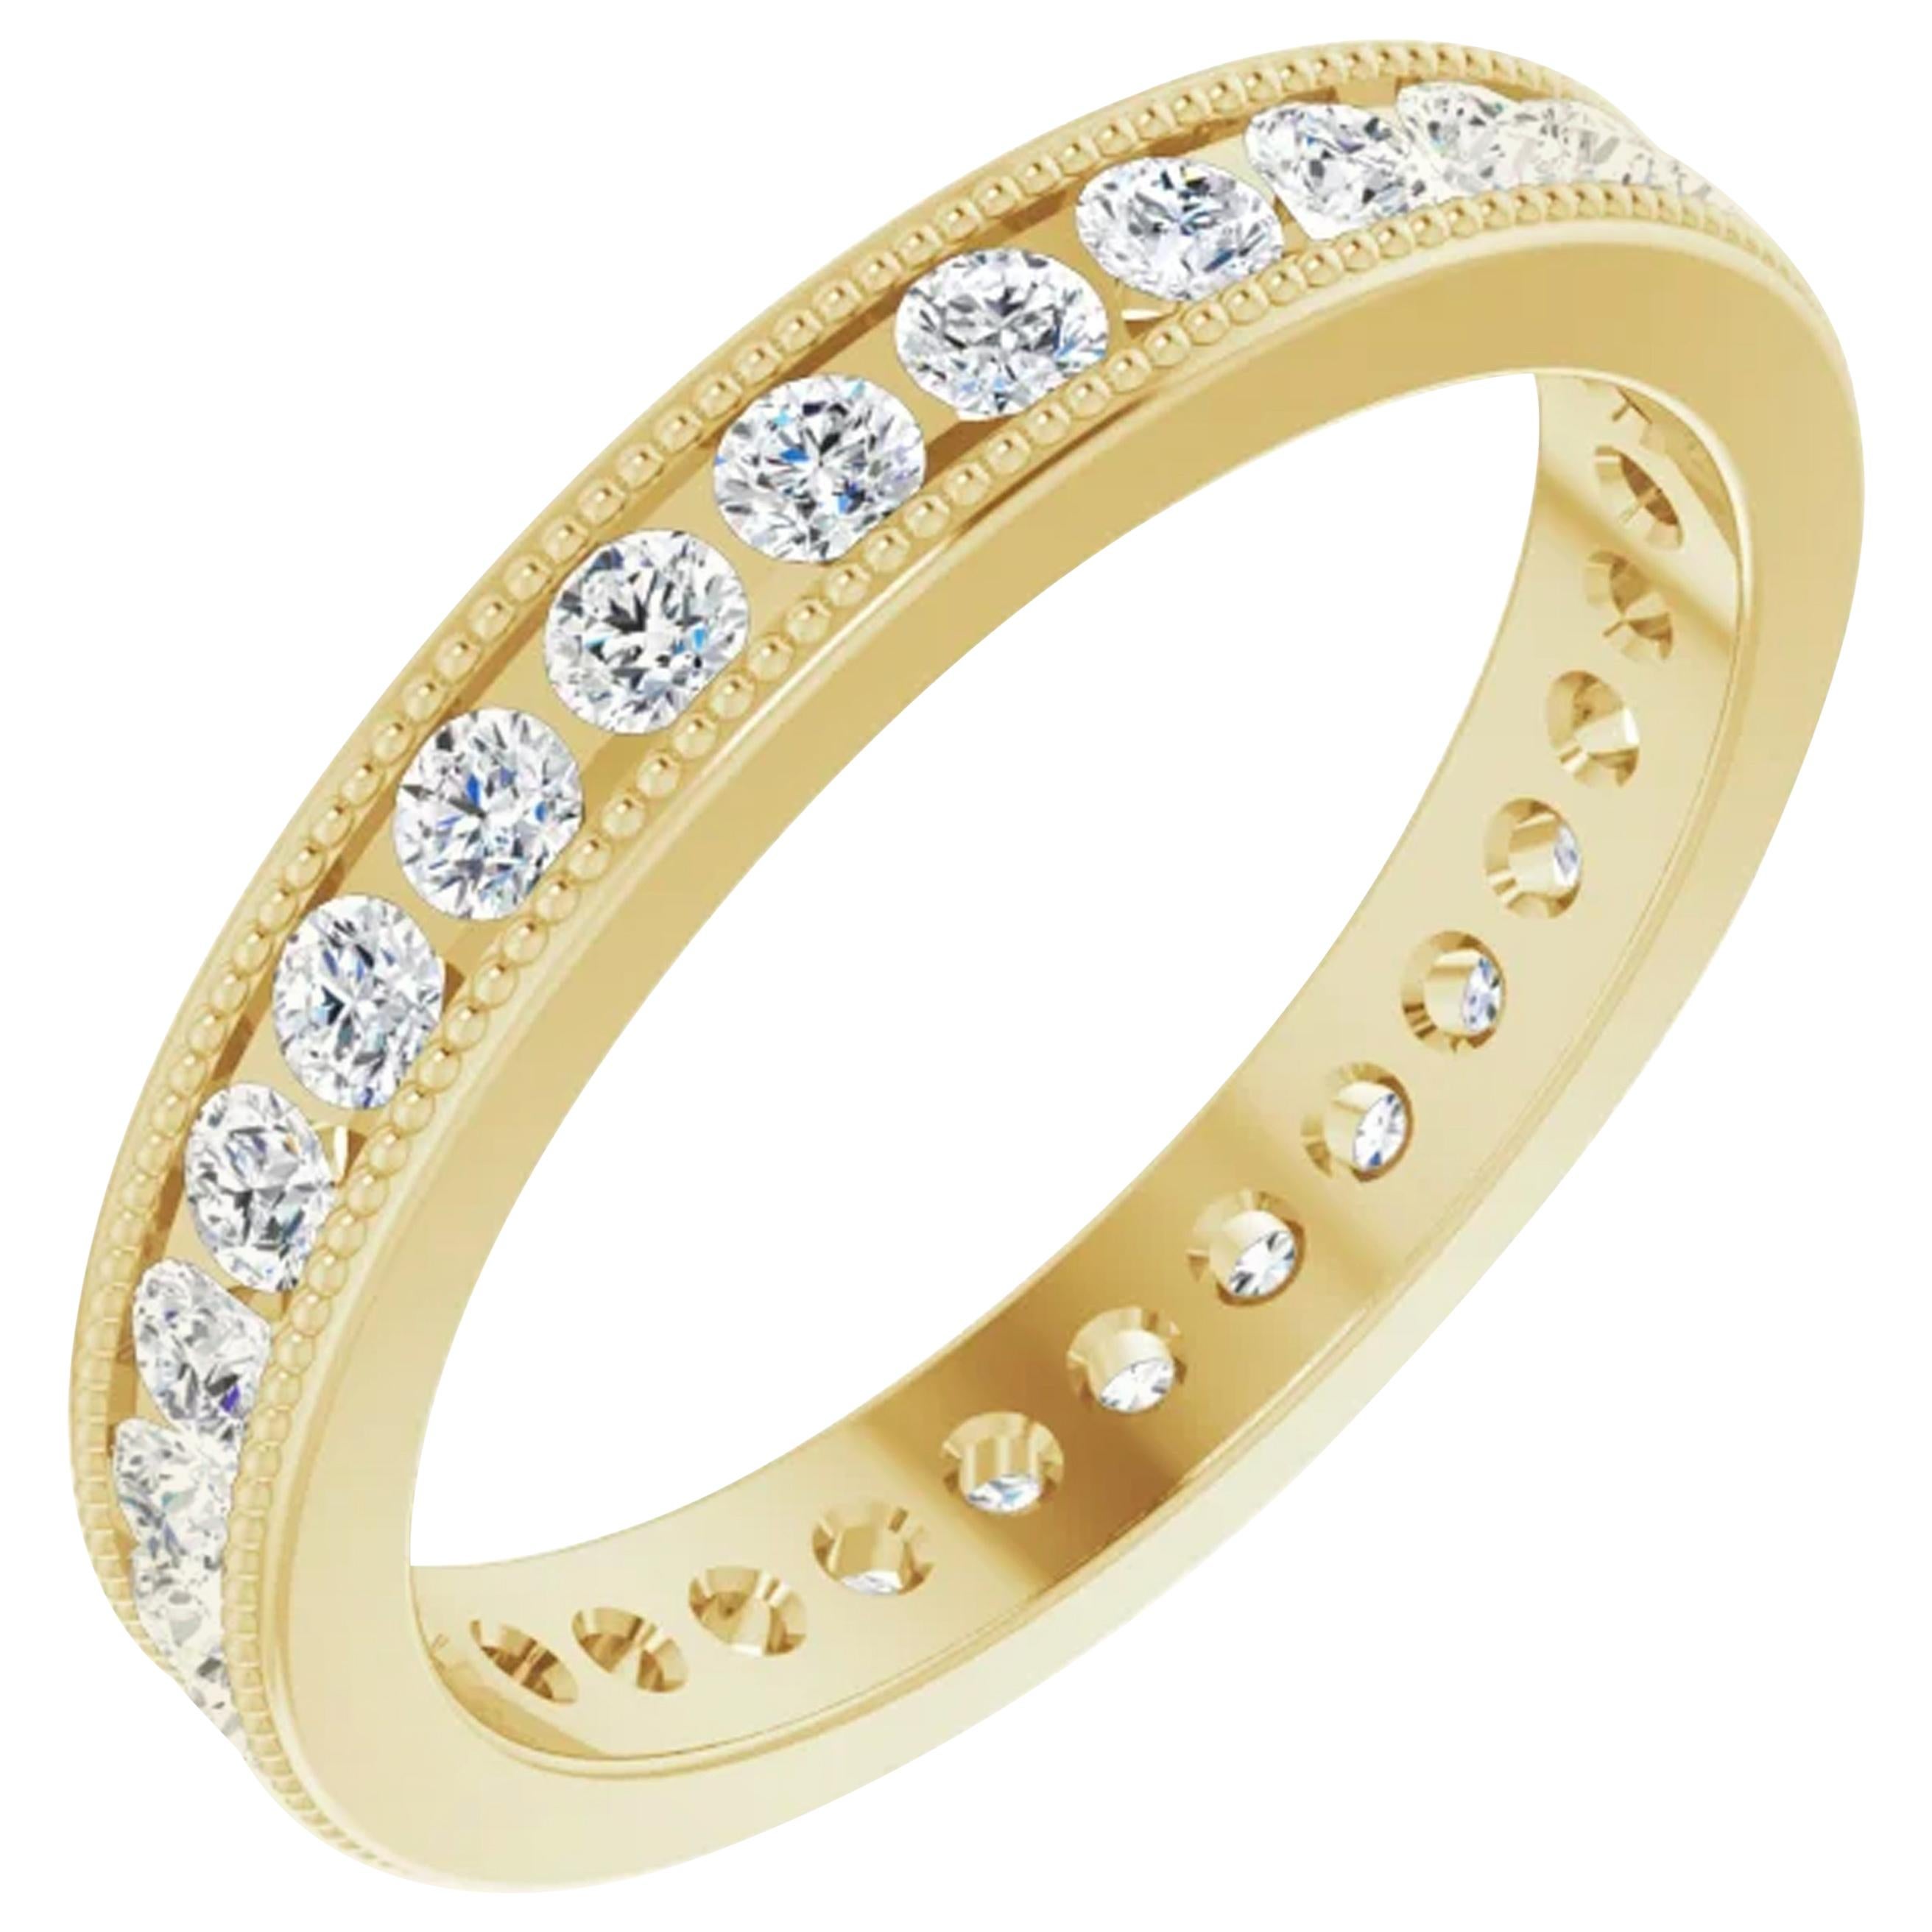 Vintage Style Channel Diamond Eternity Wedding Band 18k Yellow Gold 0.96 Carat For Sale